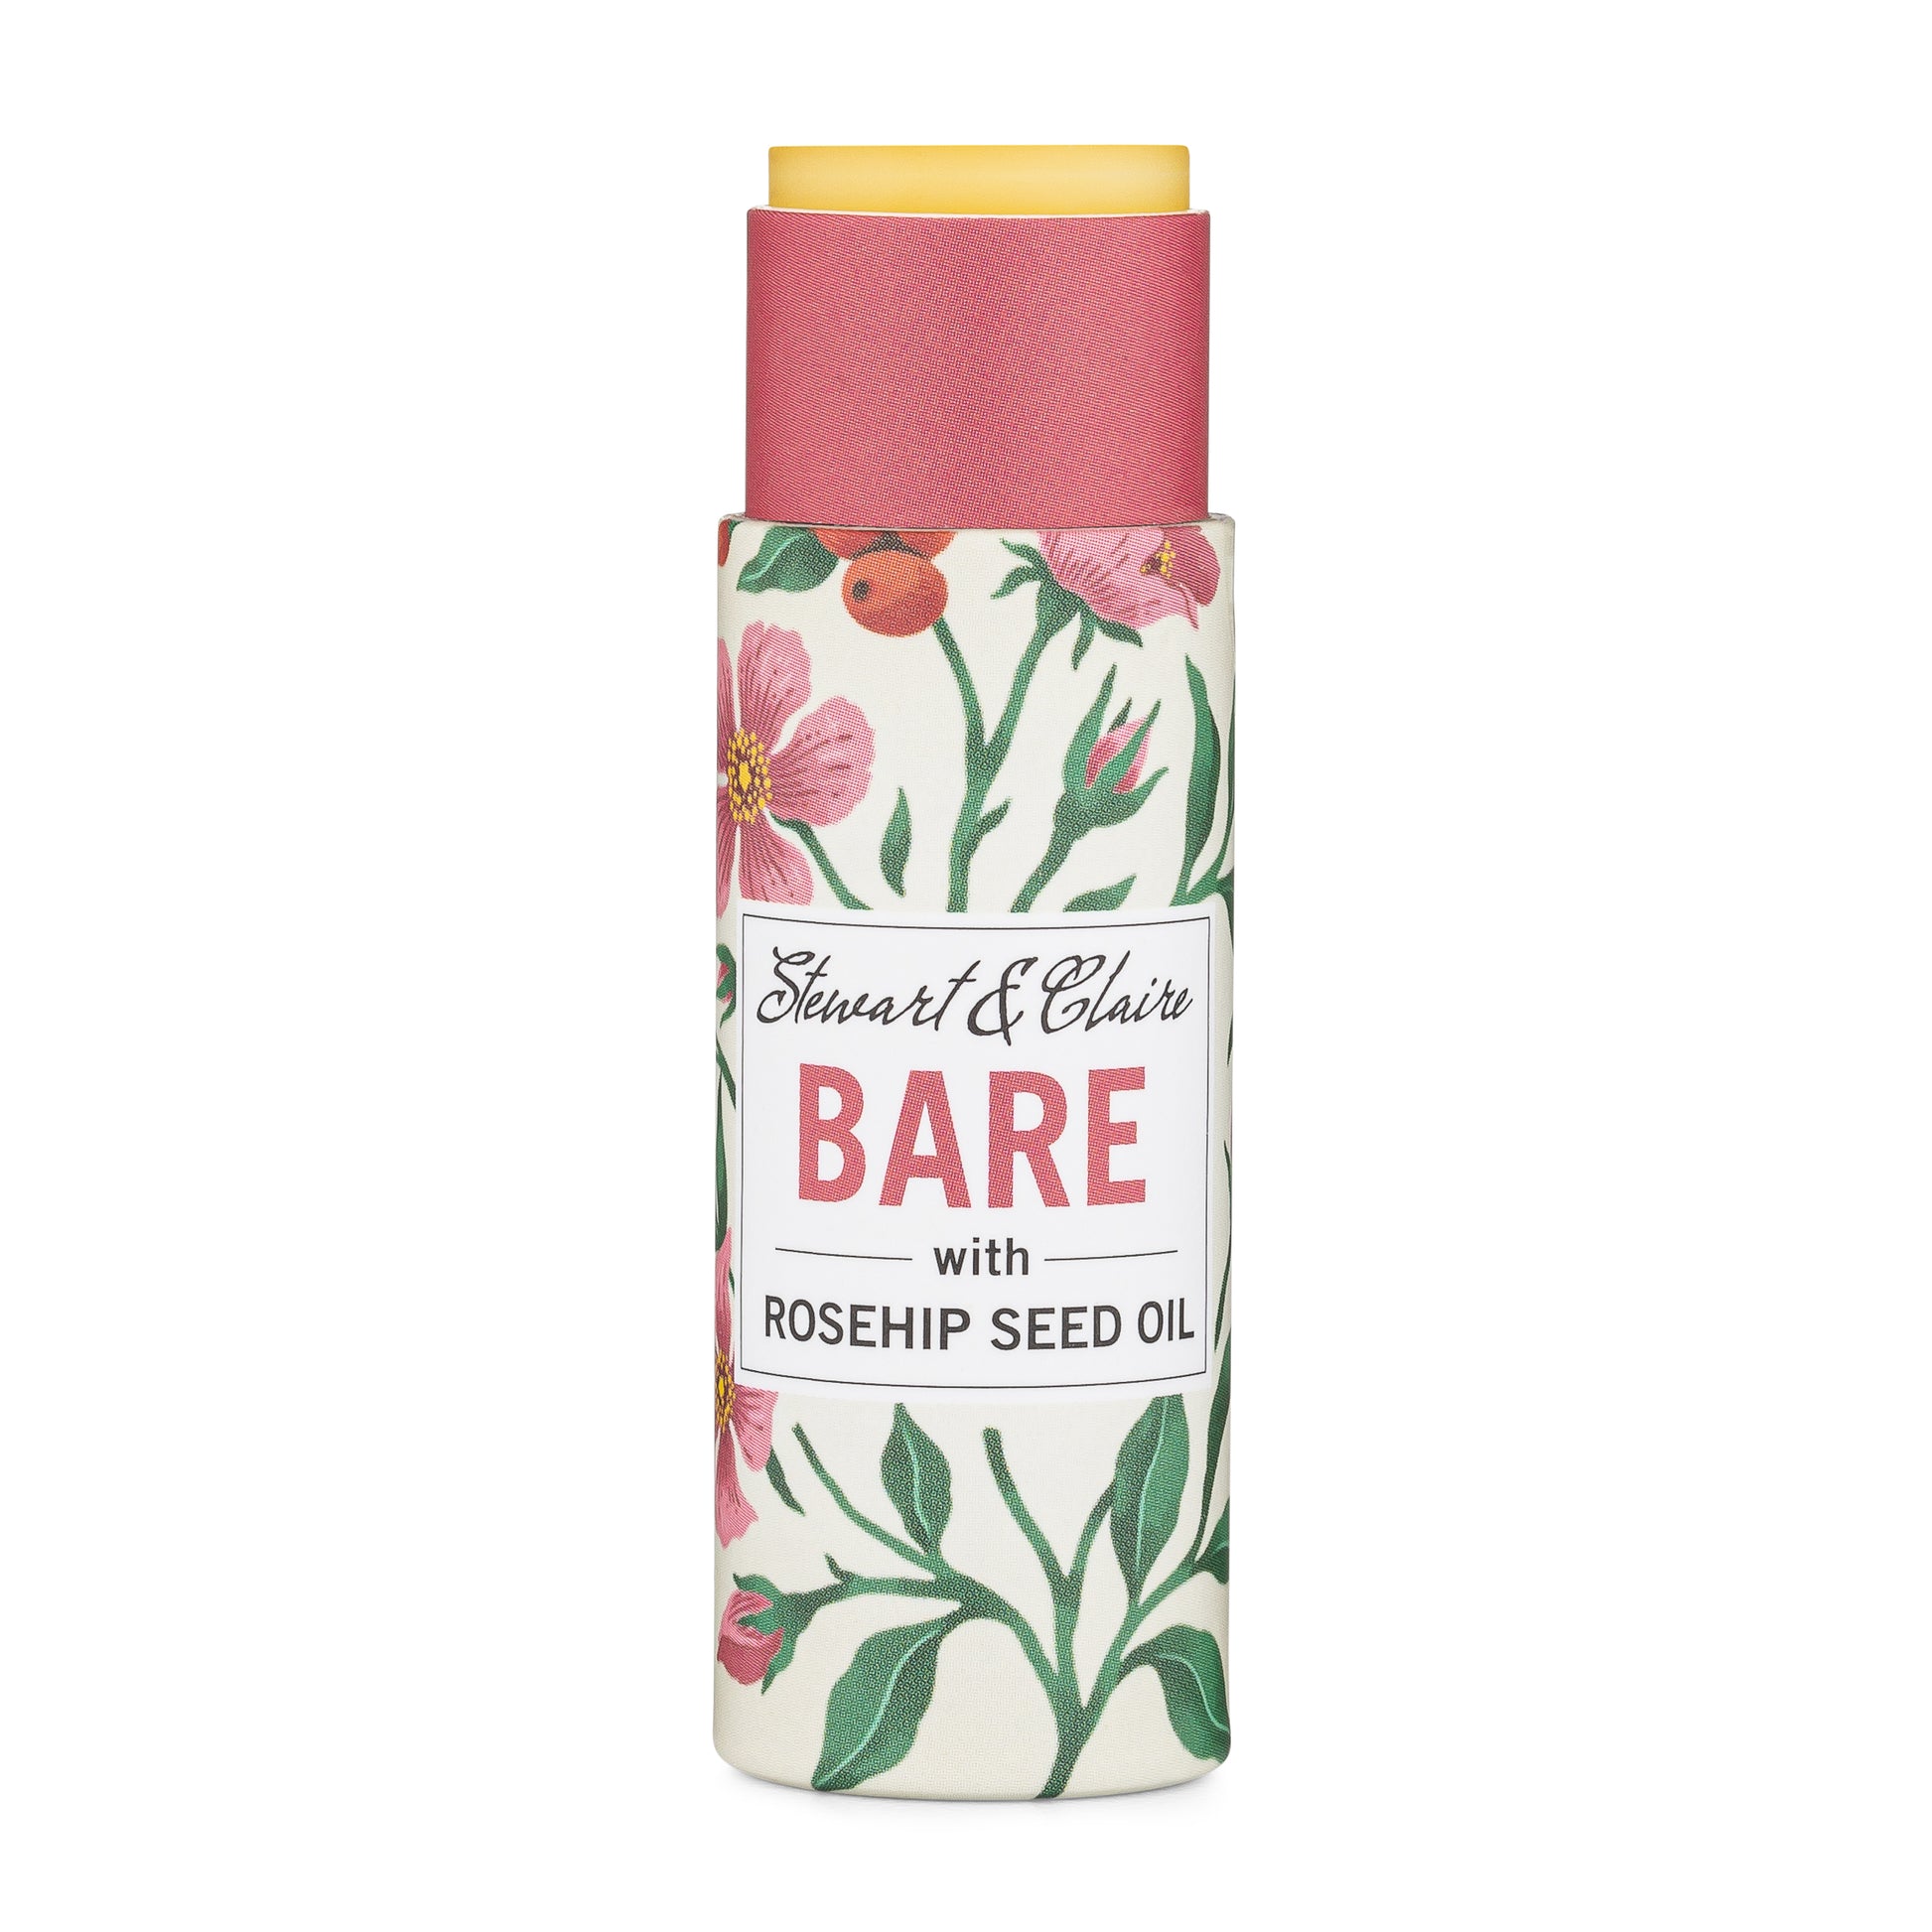 A .3 ounce paperboard tube of lip balm. The tube is off-white with illustrations of roses and rose hips. The tube is open at the top to reveal the balm, which is slightly pushed up. There is a white square on the tube with text that shows Stewart & Claire in script. It says Bare it large pink letters then with rosehip seed oil in black letters. It is on a white background. 